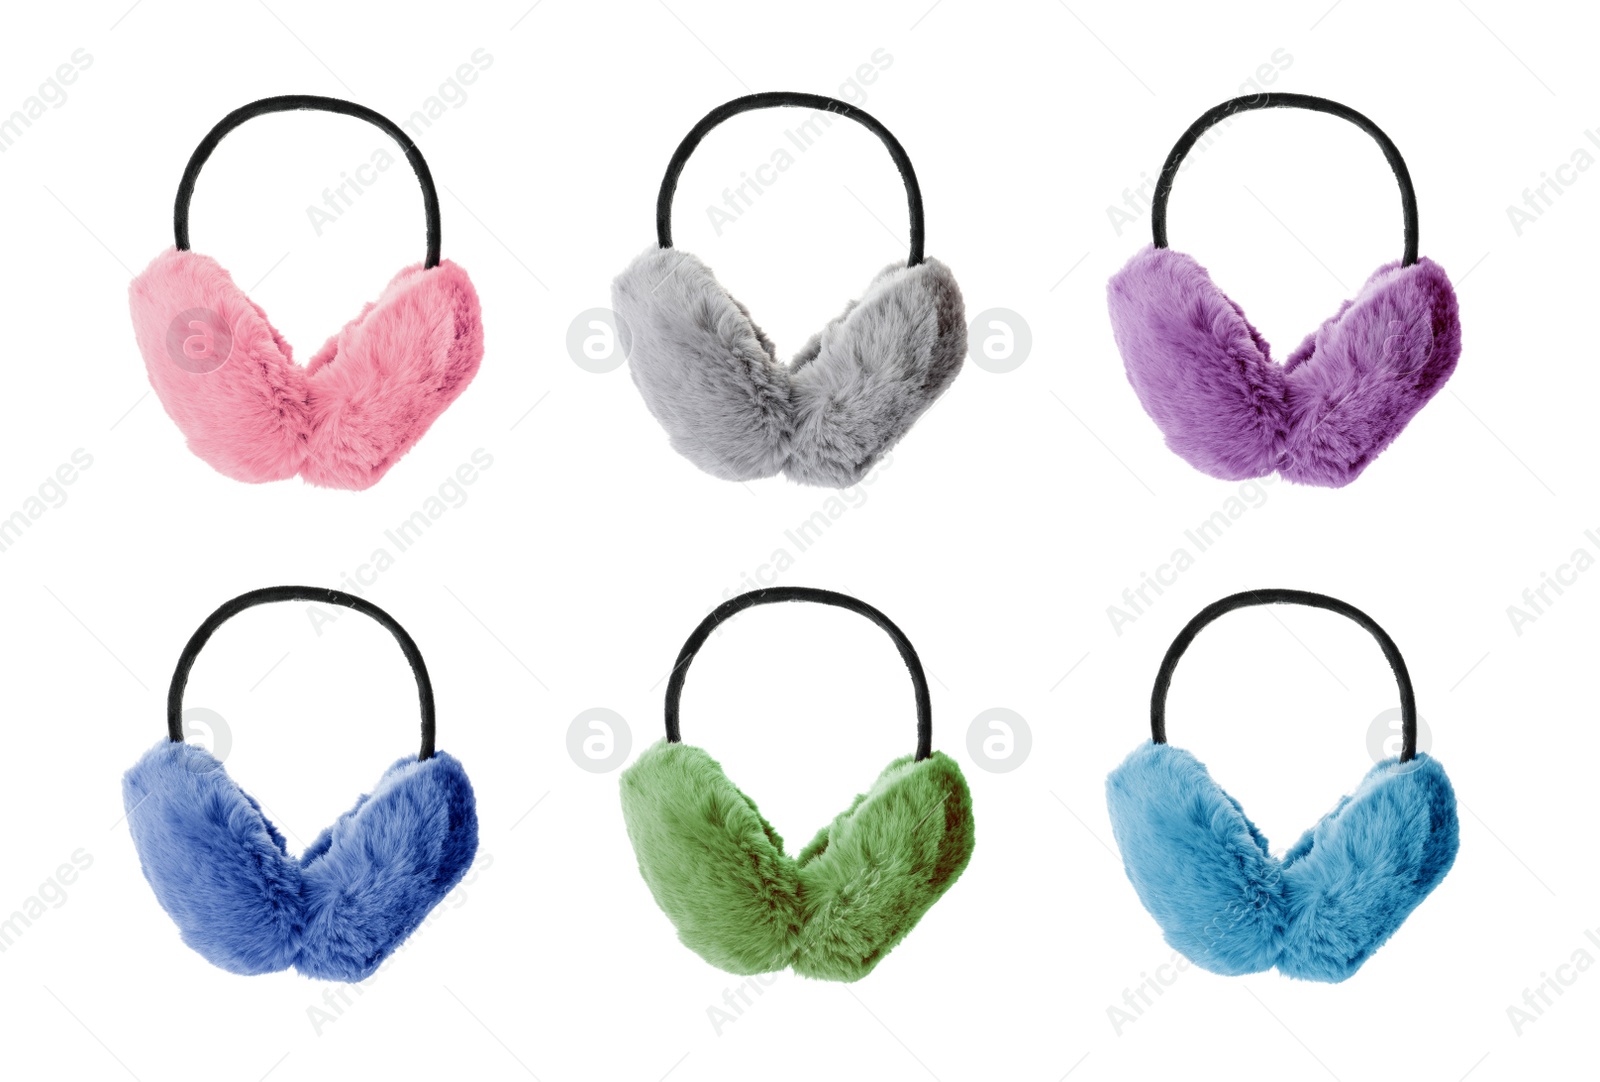 Image of Set with different colorful soft earmuffs on white background